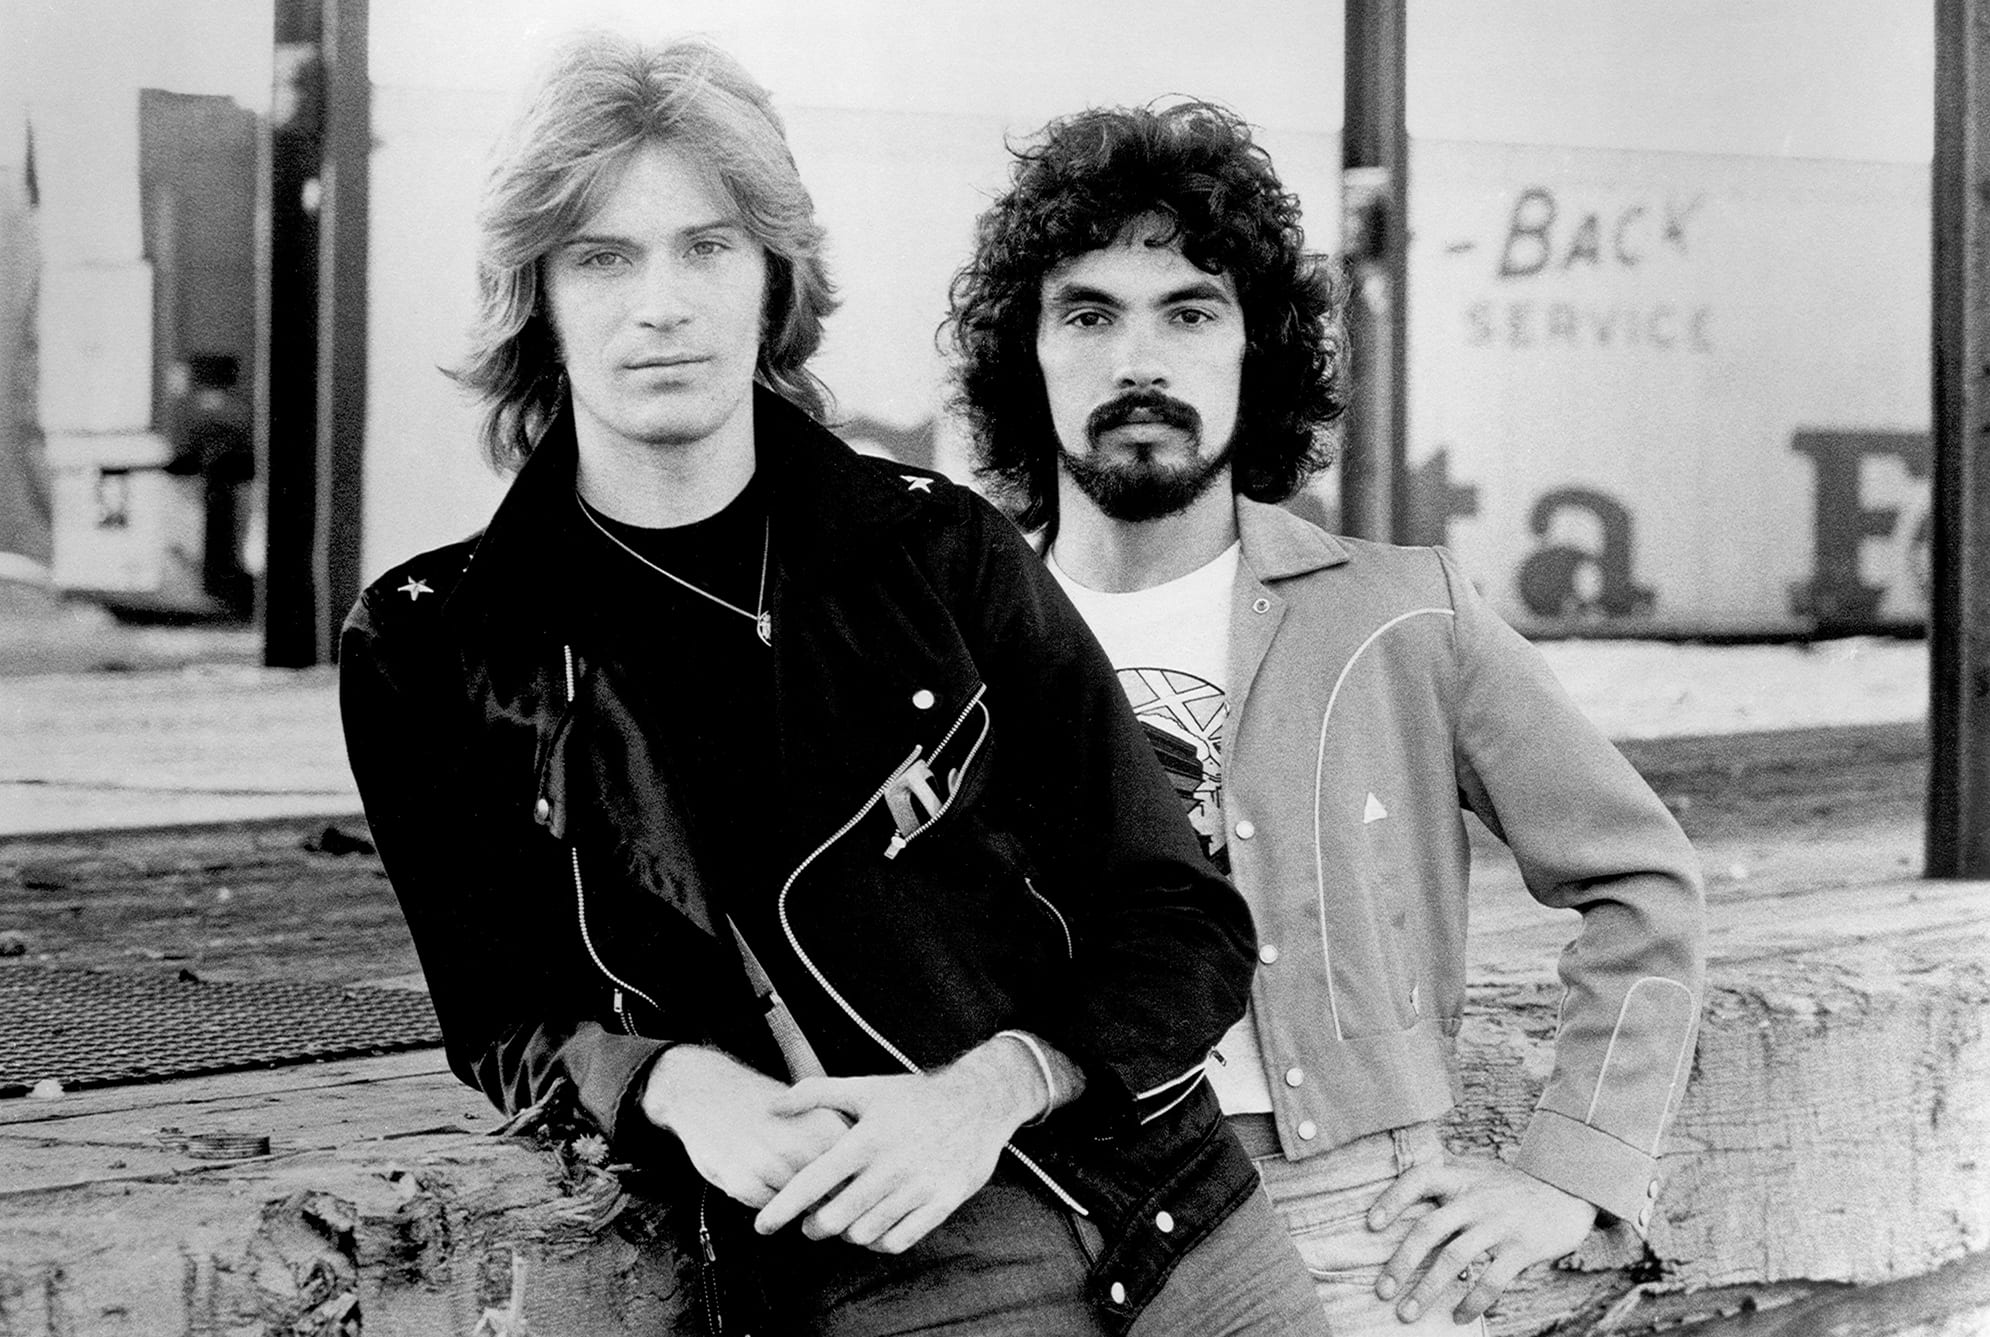 UNSPECIFIED - CIRCA 1970: Photo of Hall & Oates Photo by Michael Ochs Archives/Getty Images